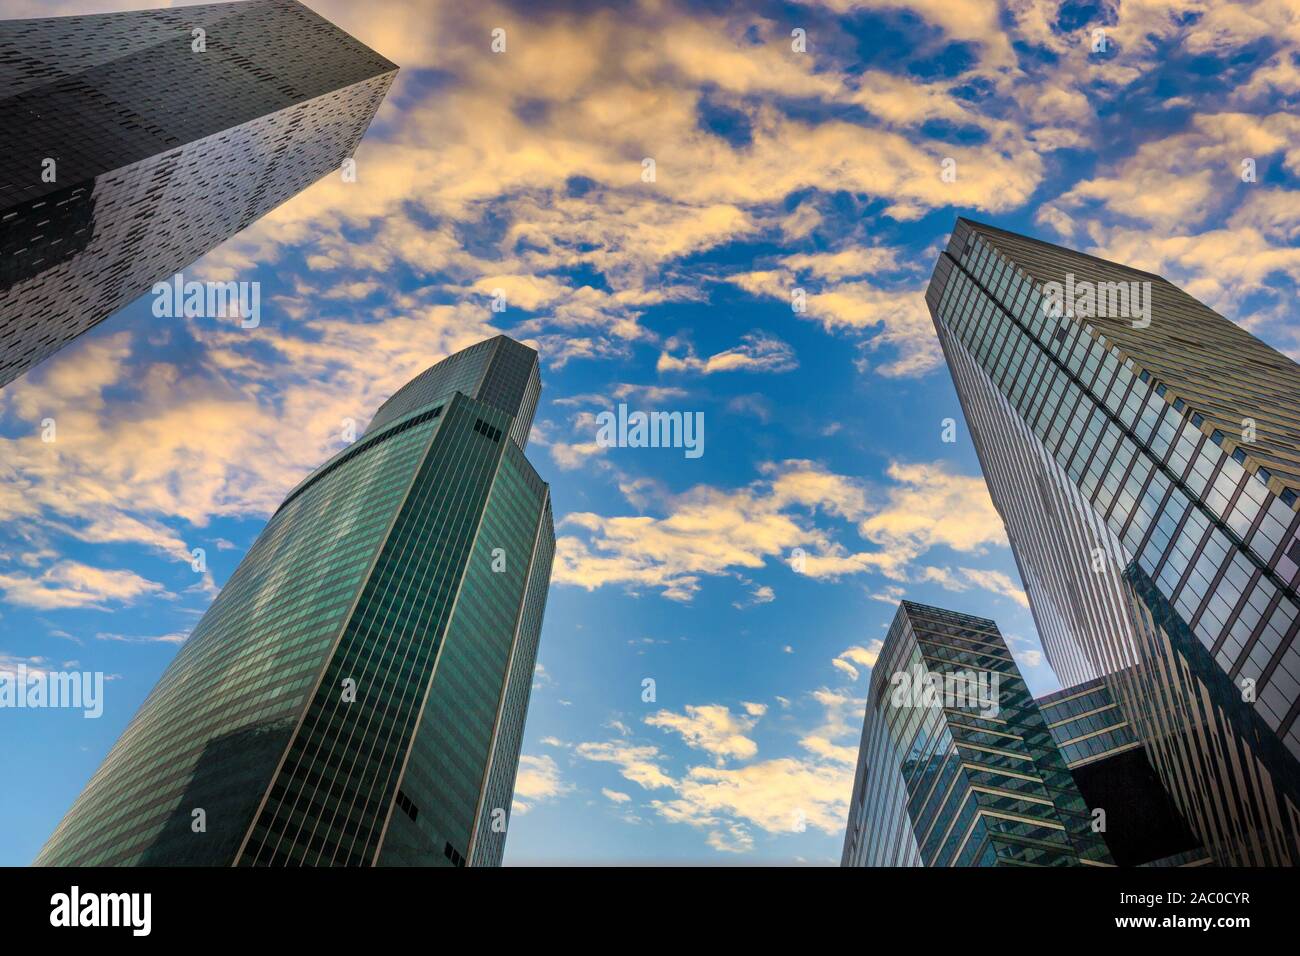 Silhouettes of skyscrapers in the city on a sunset sky background. Stock Photo